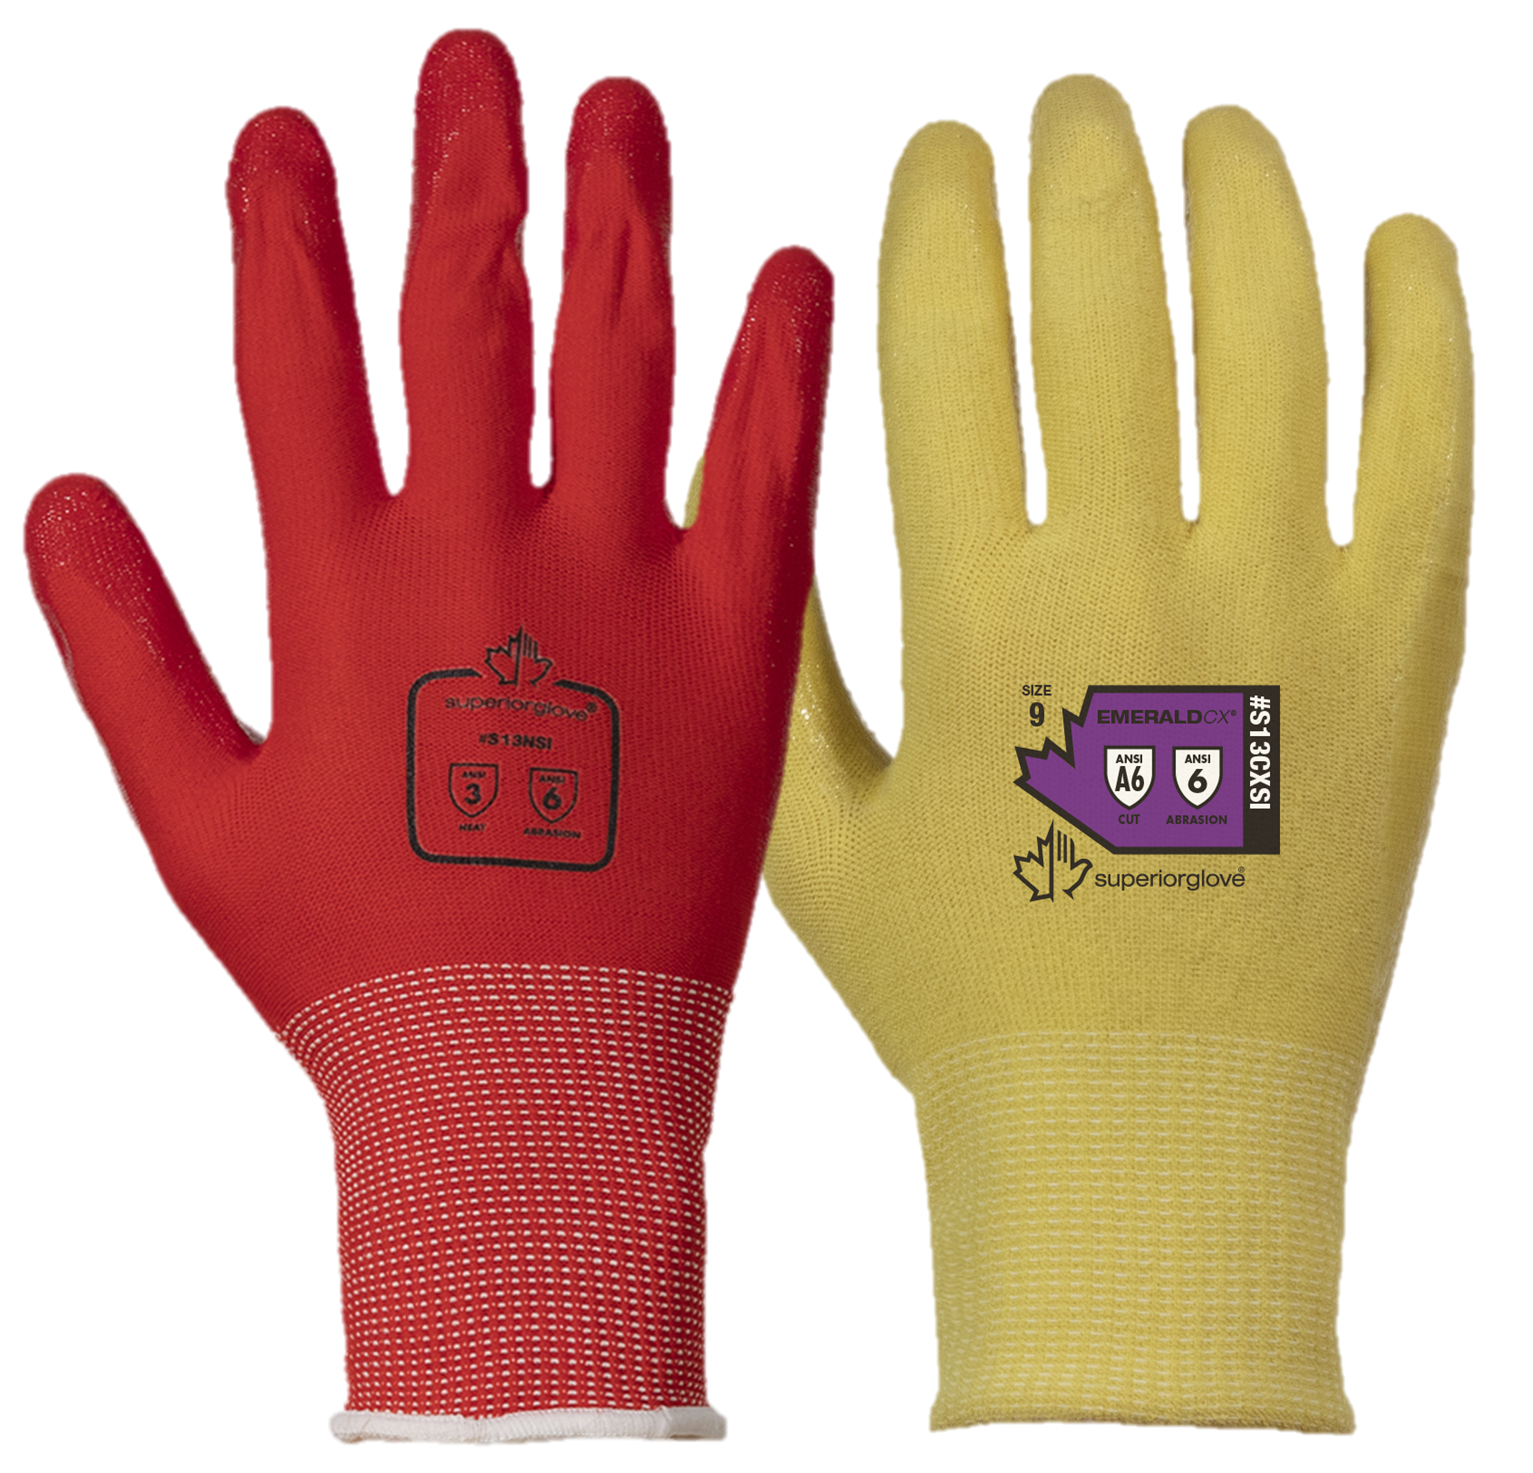 Tack-Free, Non-Marring Industrial Work Safety Gloves Resists Adhesives